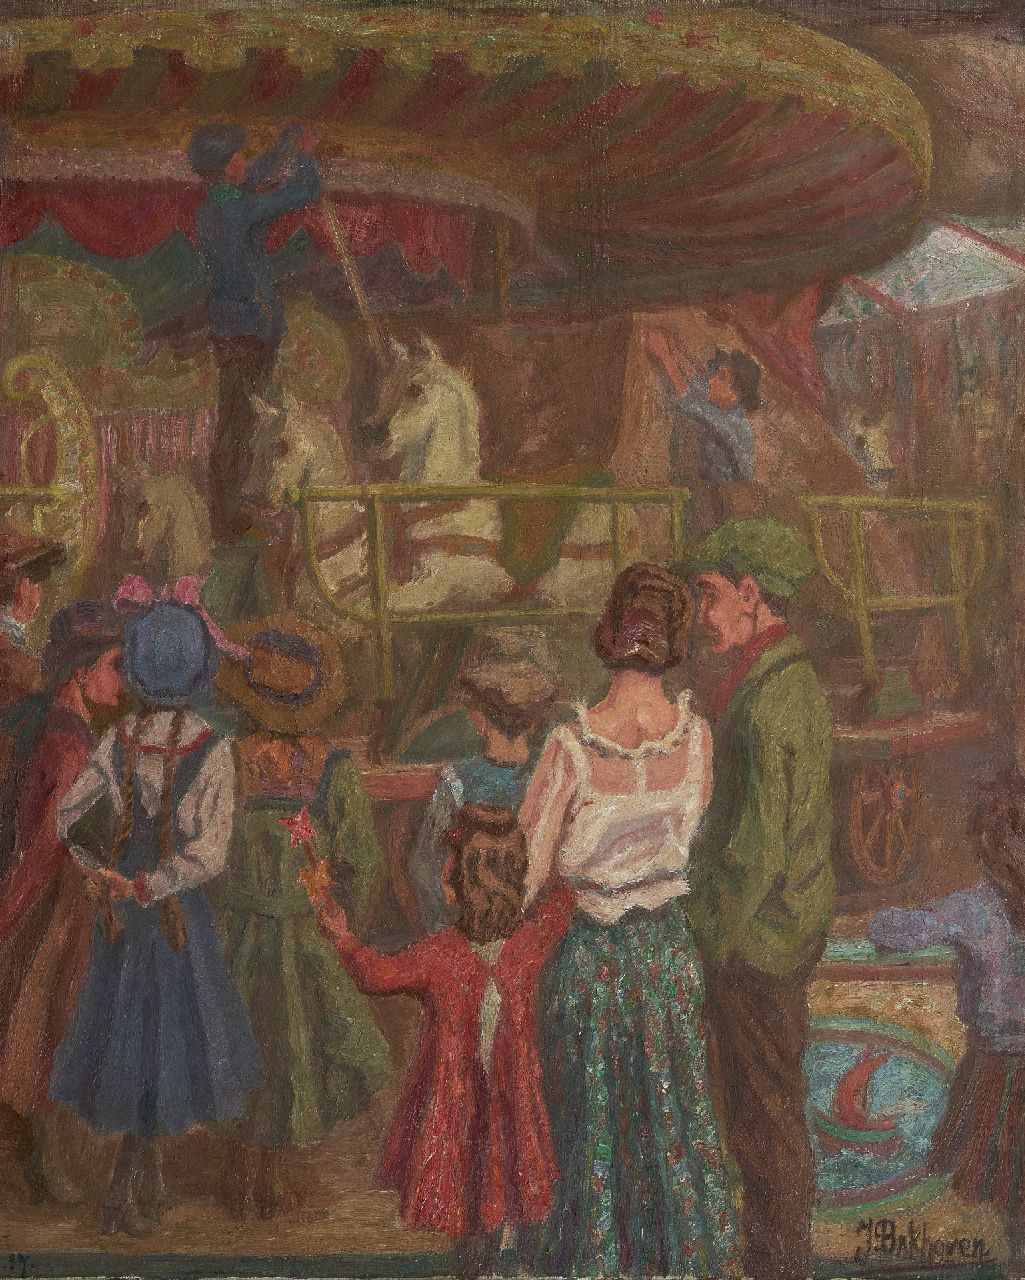 Bakhoven J.A.P.  | 'Jan' Alexander Paul Bakhoven | Paintings offered for sale | Assembling the carousel, oil on canvas 52.0 x 42.1 cm, signed l.r. and dated '37